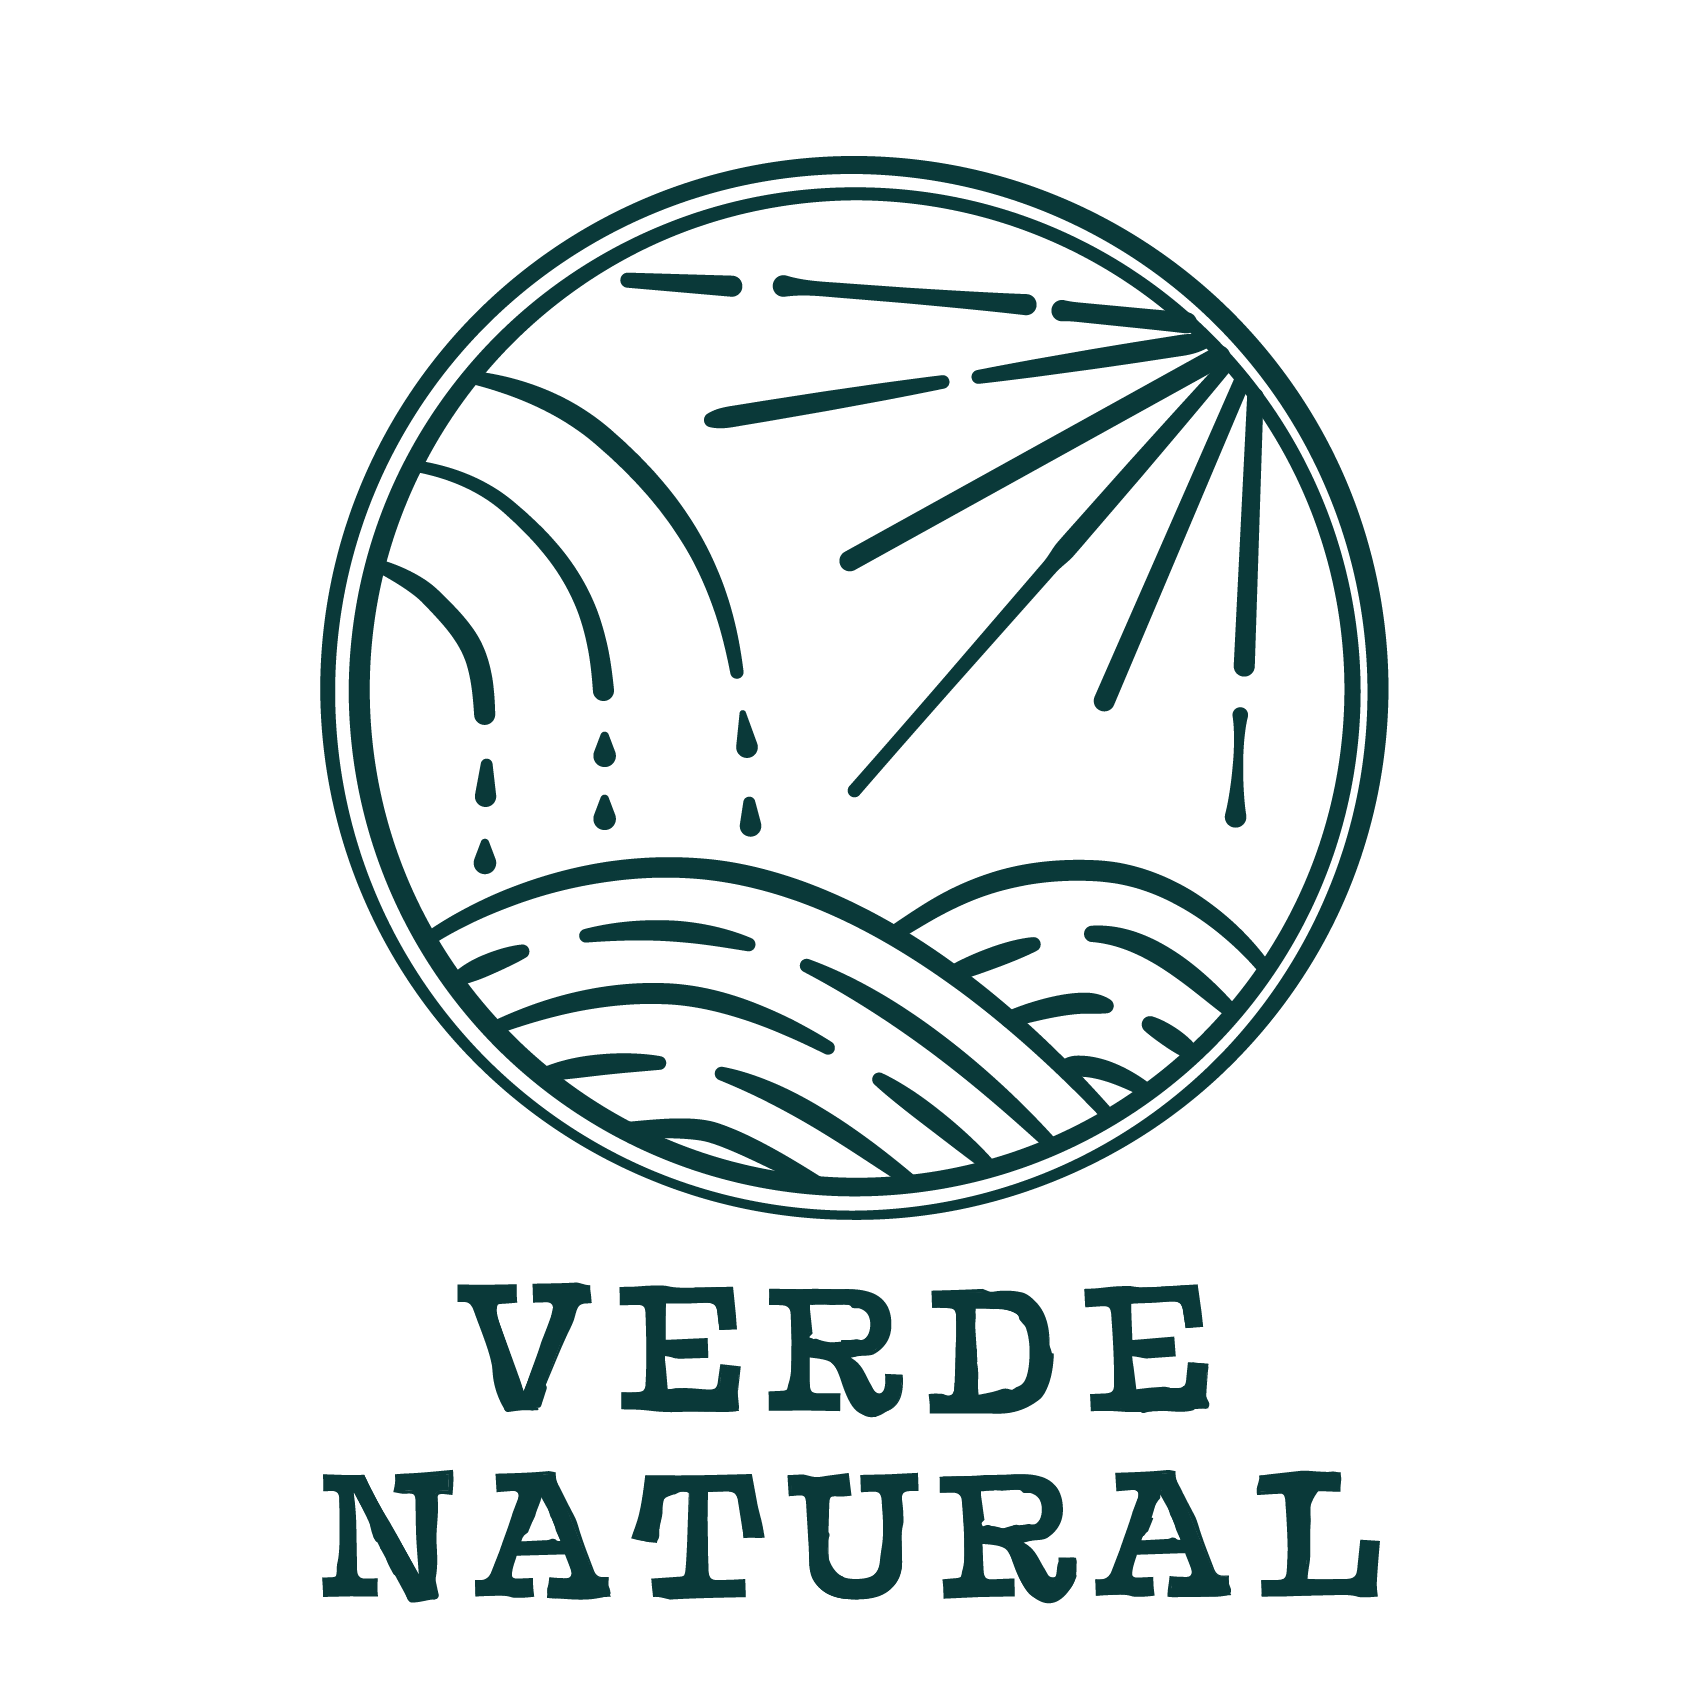 Business logo of Verde Natural Recreational Weed Dispensary